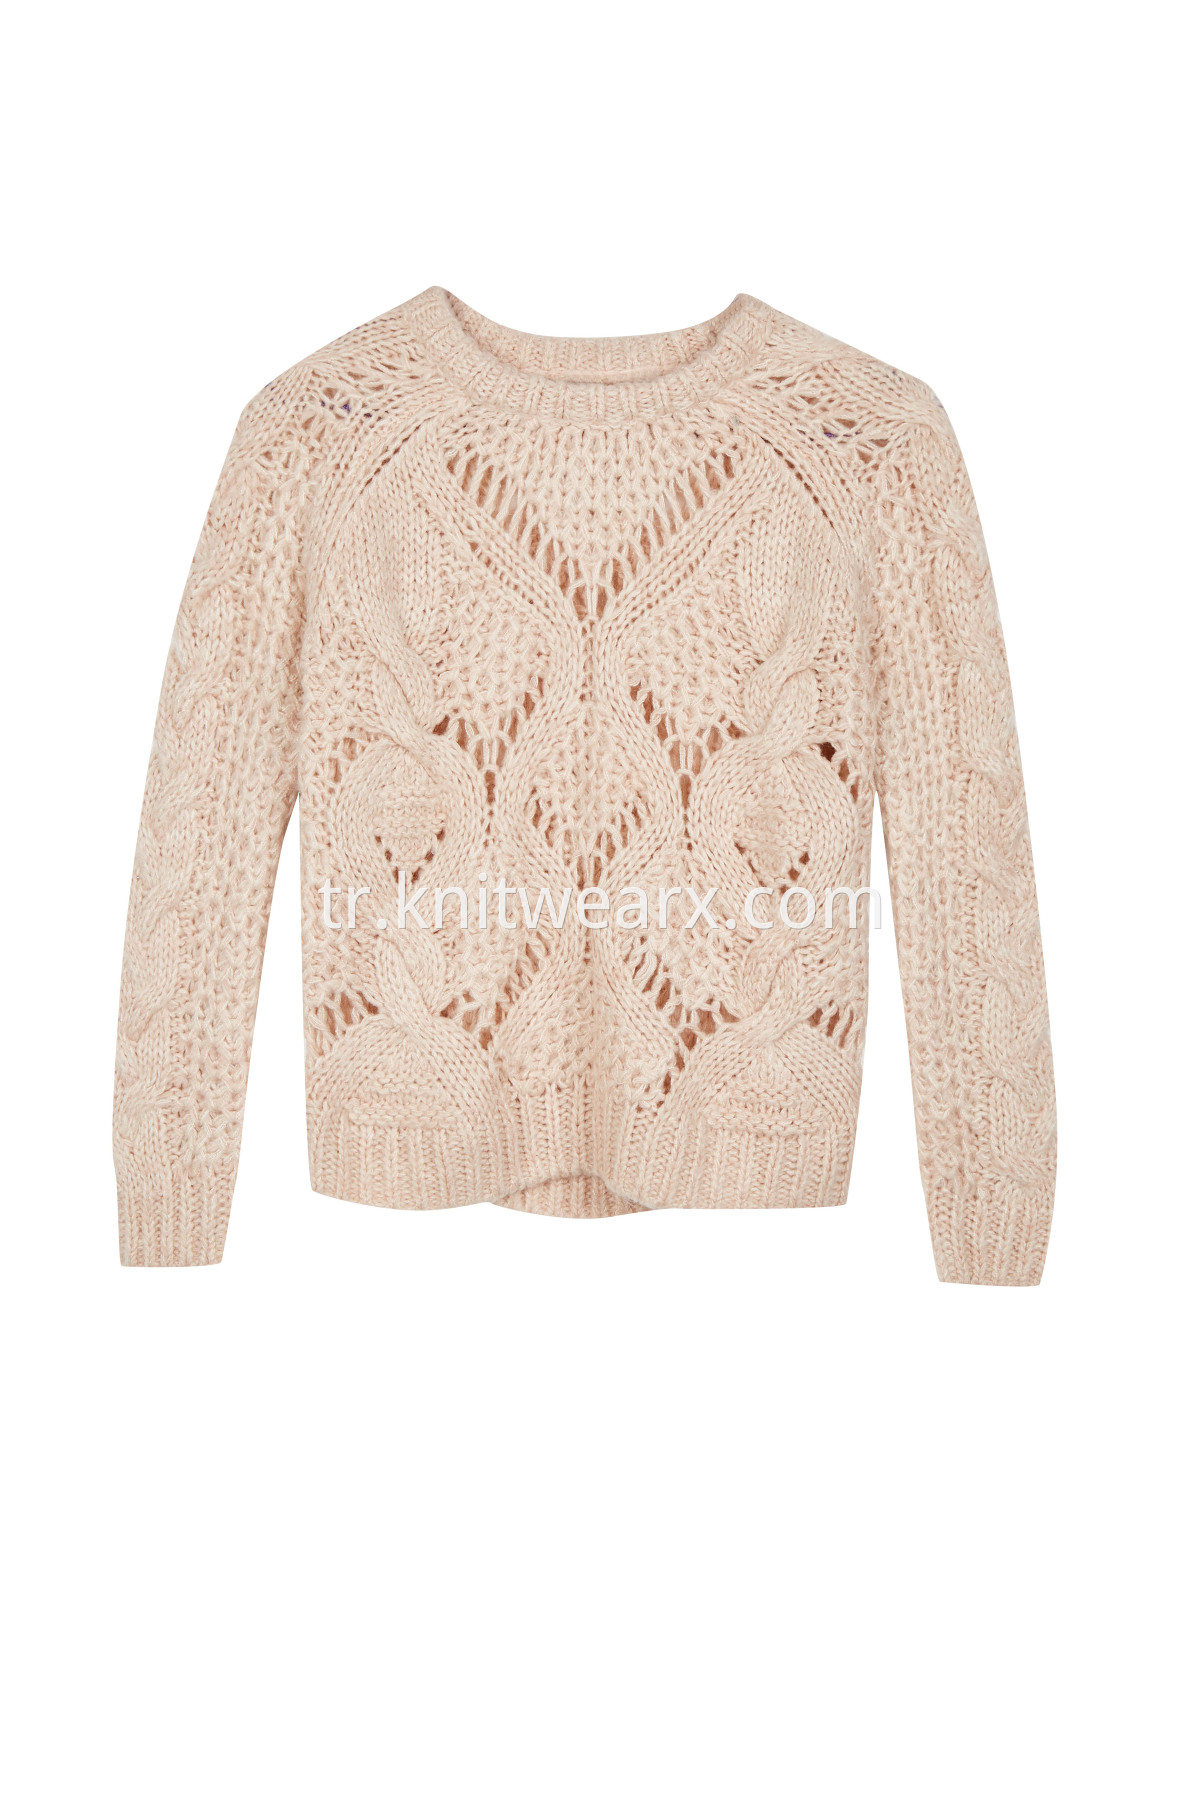 Women's Hollow Out Chunky Cable Knit Pullover Sweater